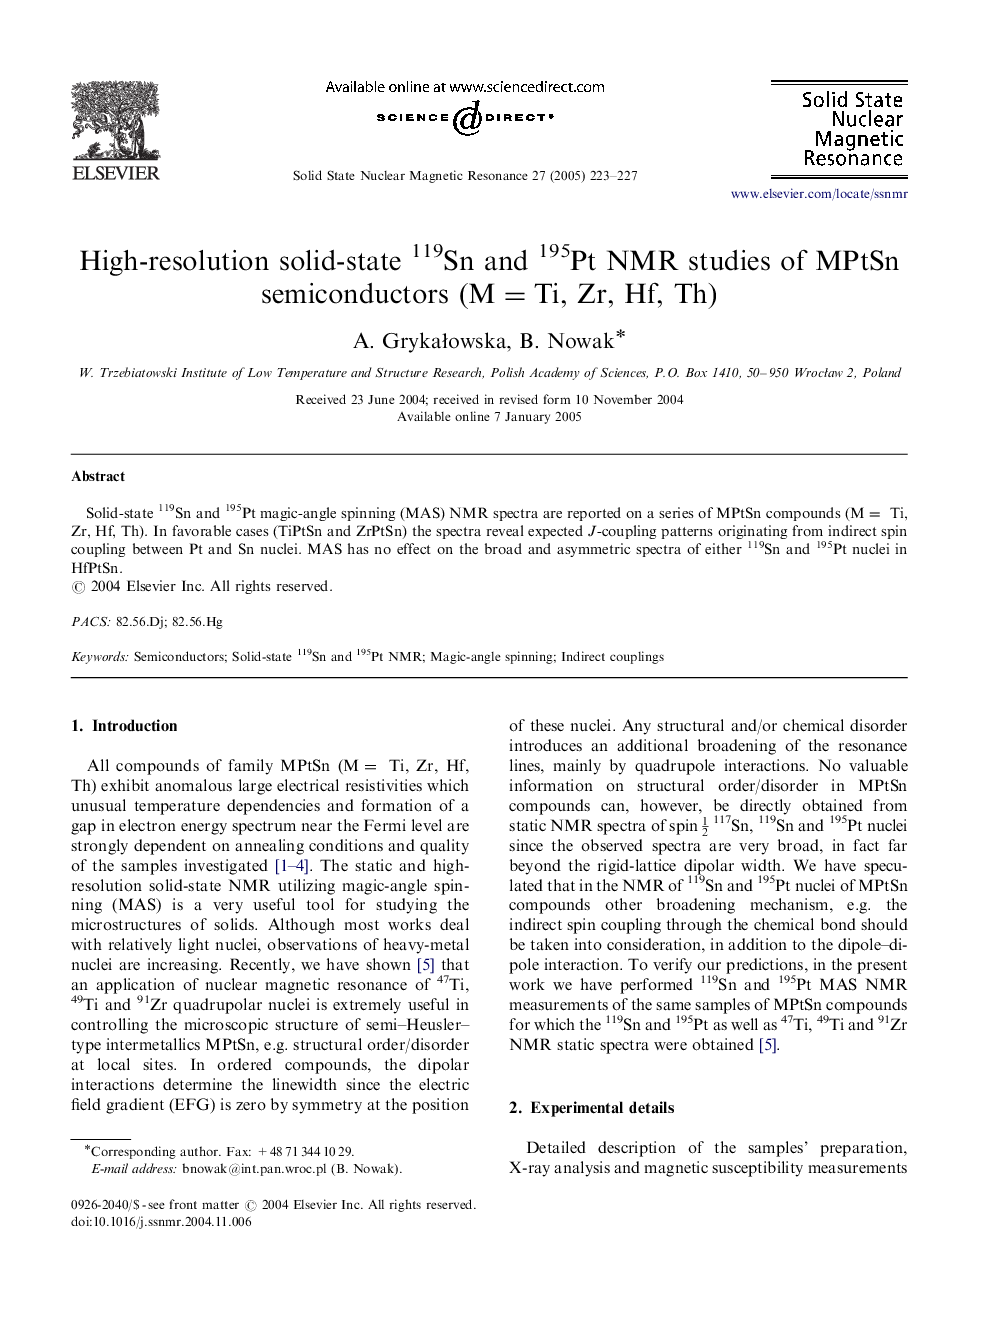 High-resolution solid-state 119Sn and 195Pt NMR studies of MPtSn semiconductors (M=Ti, Zr, Hf, Th)